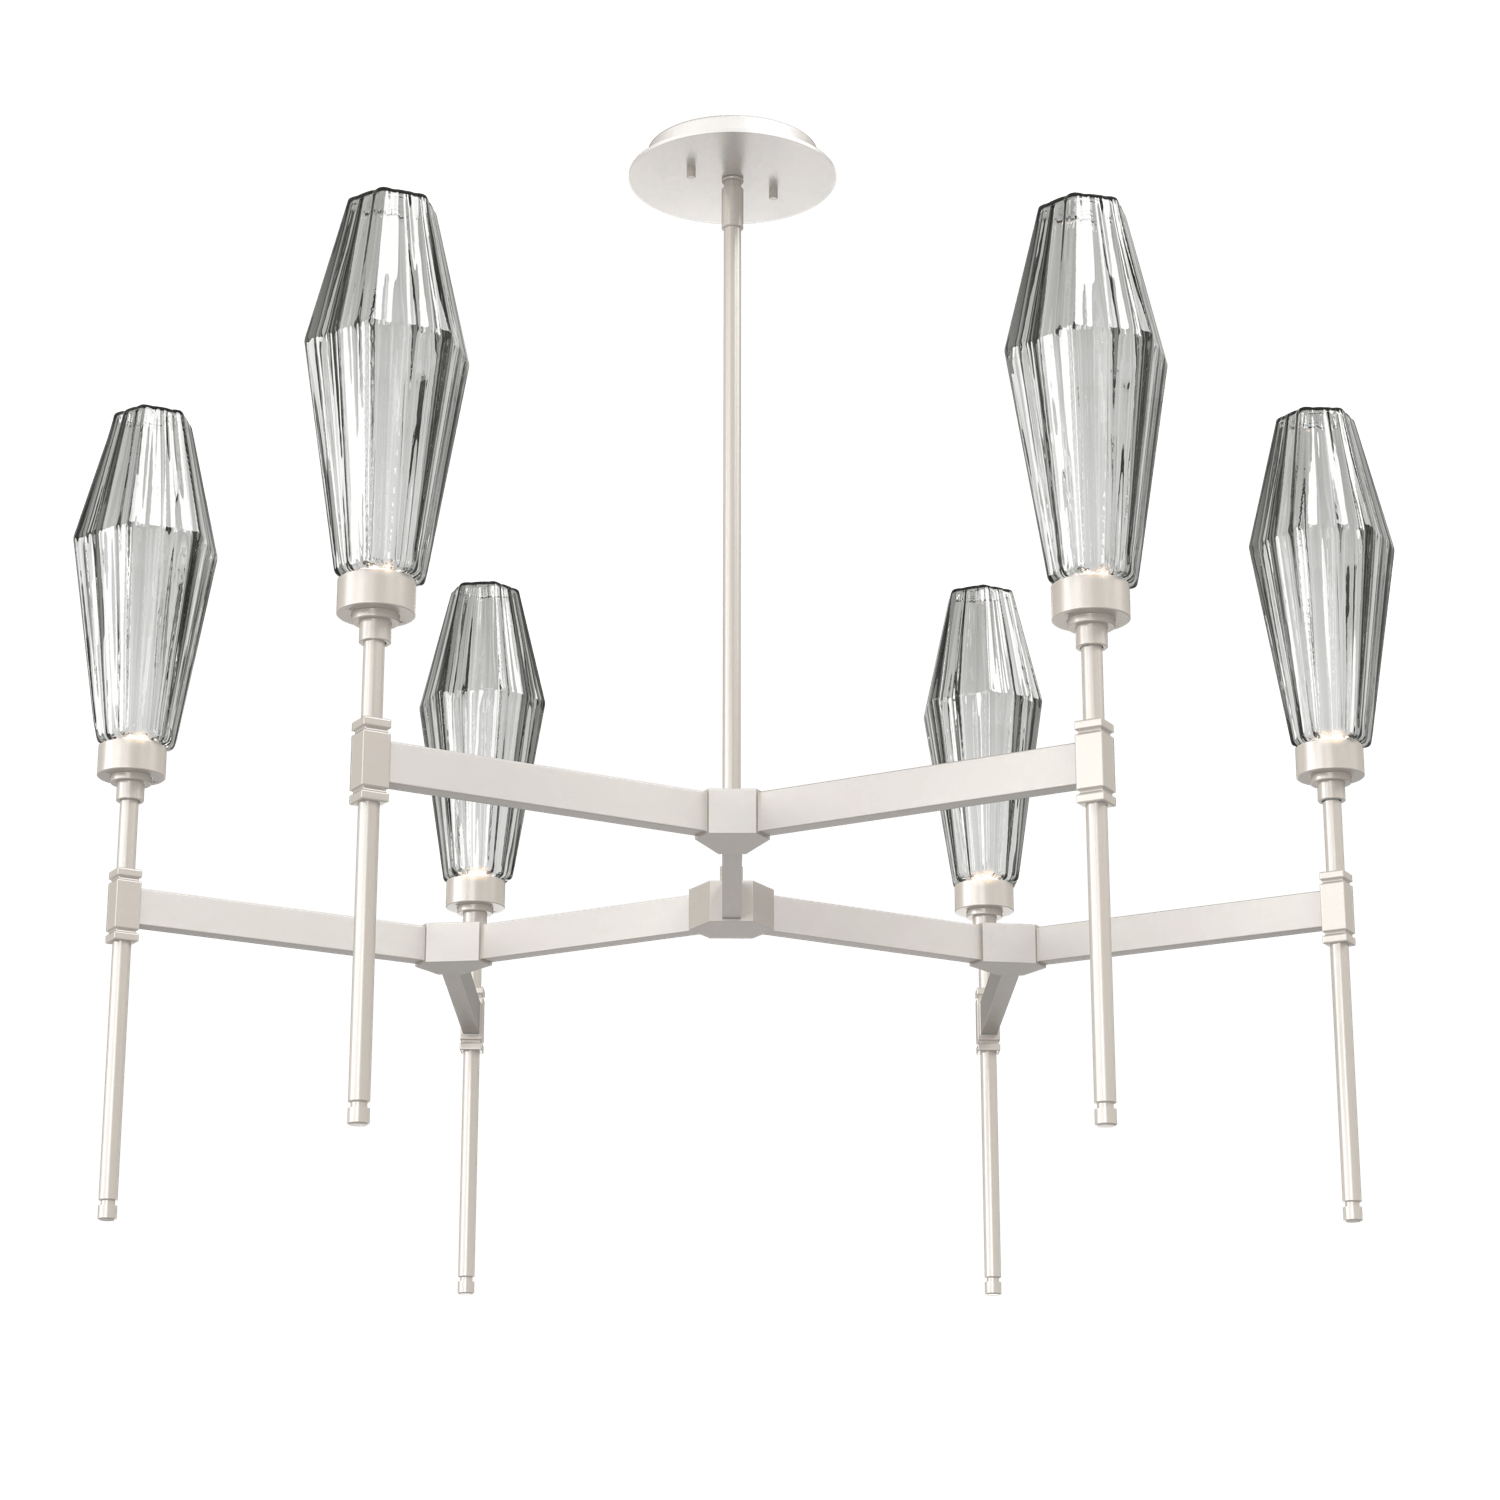 CHB0049-37-BS-RS-Hammerton-Studio-Aalto-37-inch-round-belvedere-chandelier-with-metallic-beige-silver-finish-and-optic-ribbed-smoke-glass-shades-and-LED-lamping